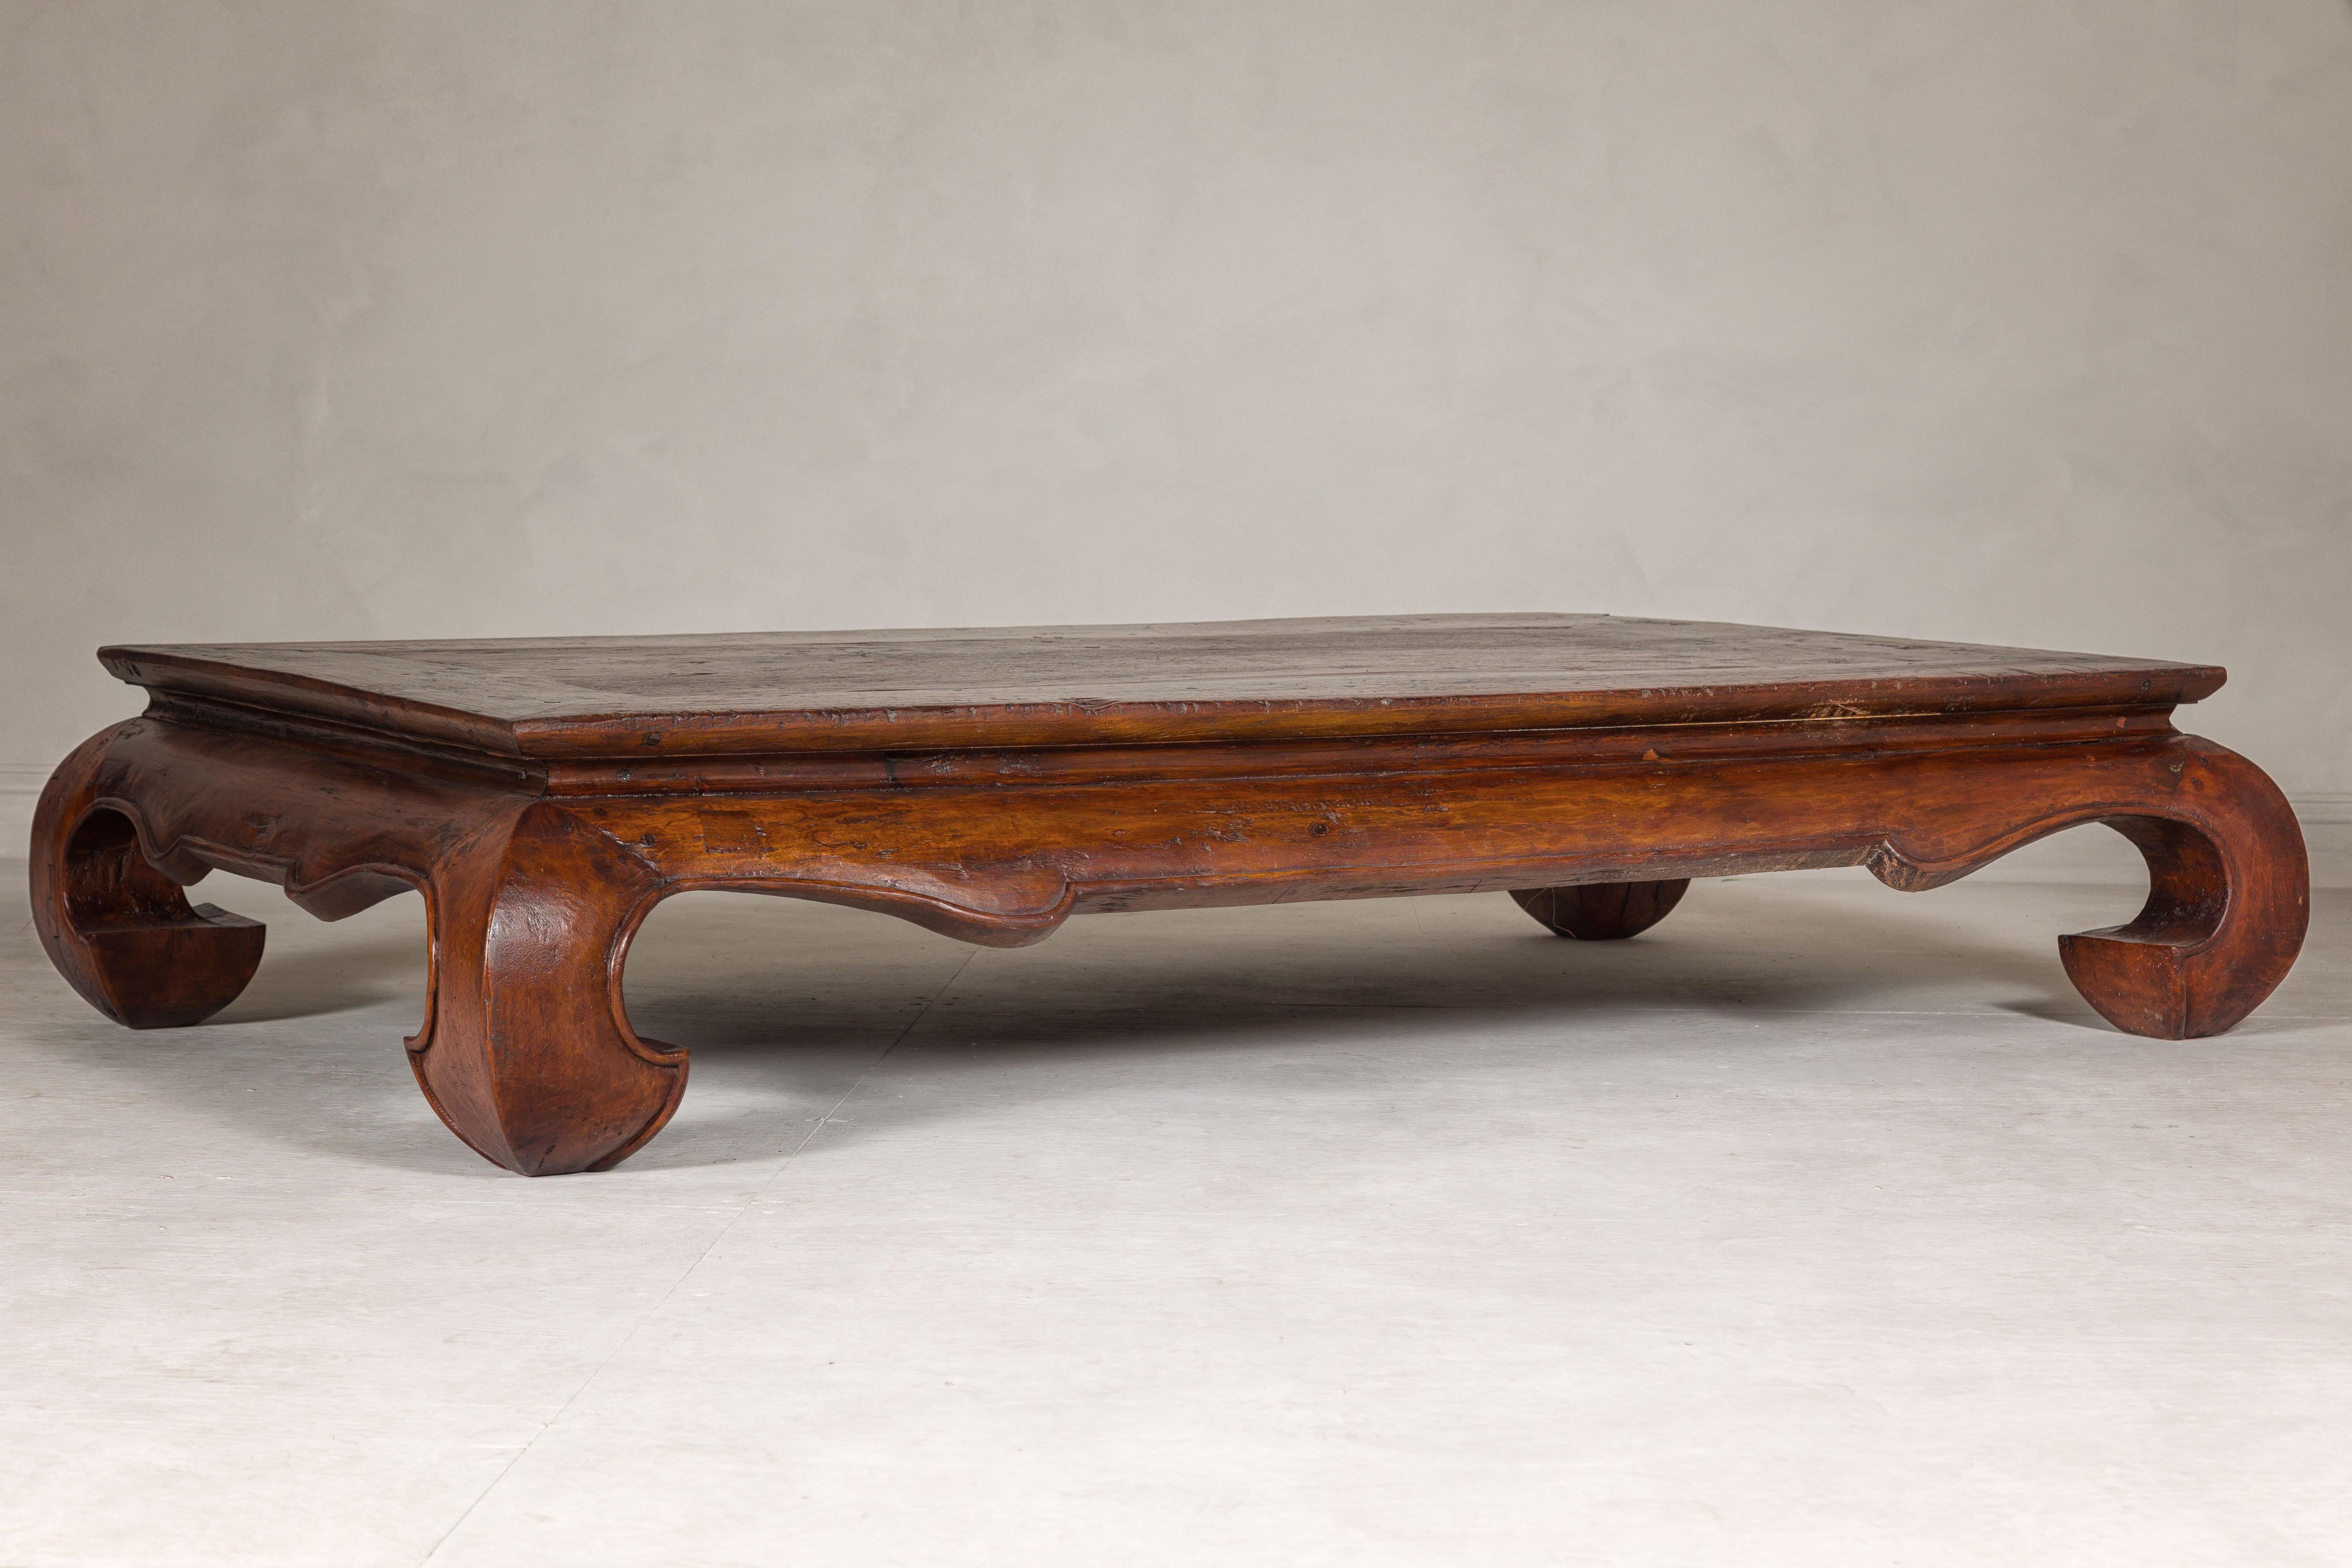 Qing Dynasty 19th Century Chow Leg Kang Table with Weathered Rustic Patina For Sale 6